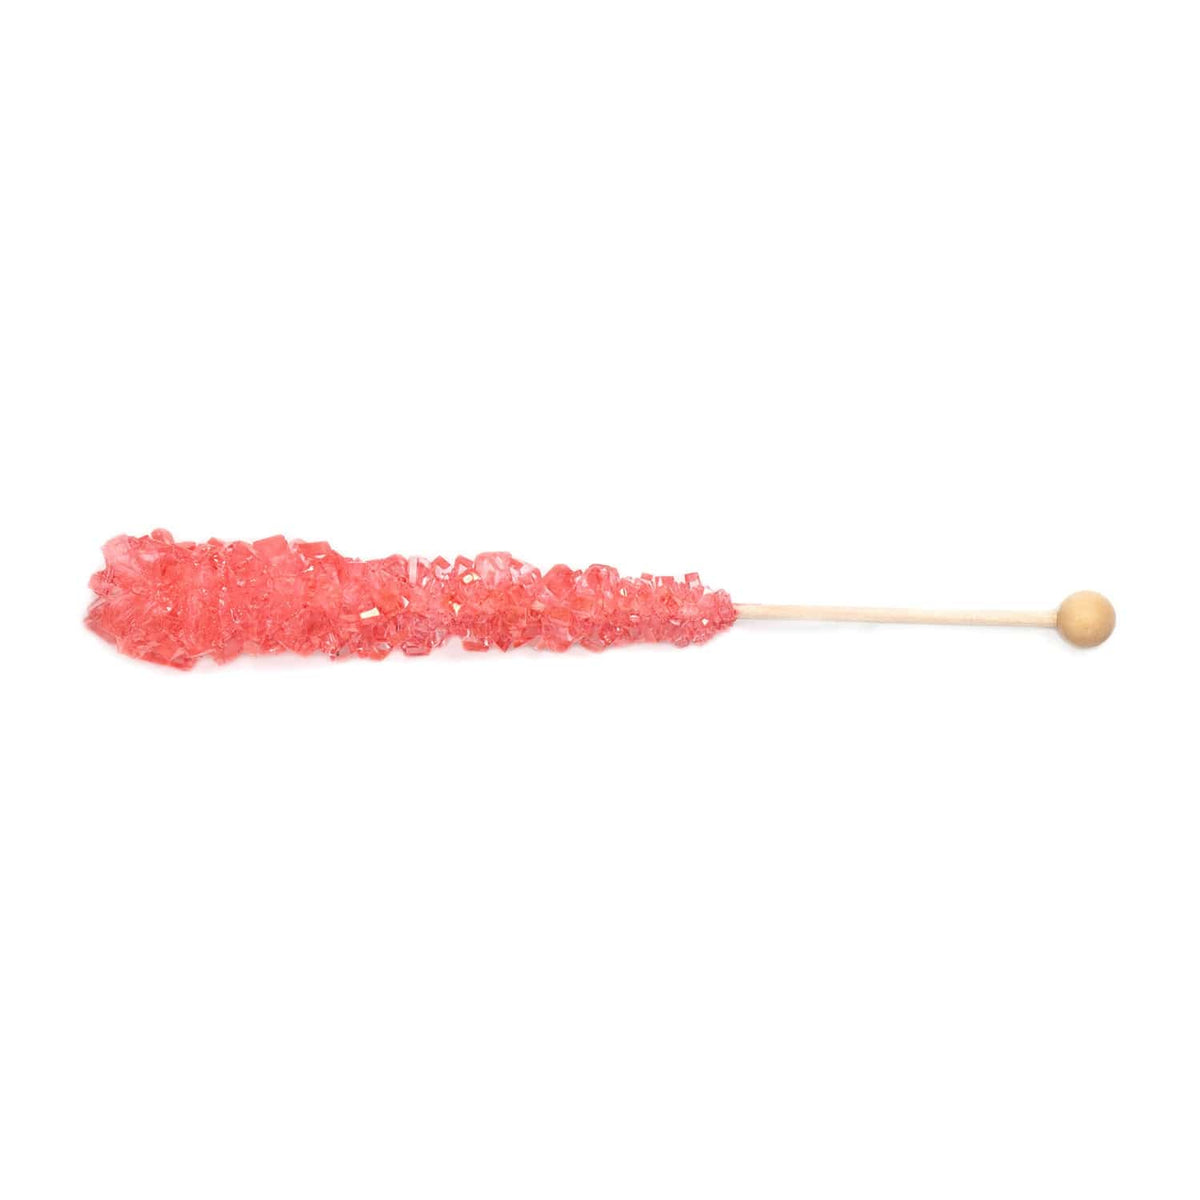 Lolli and Pops L&amp;P Collection Cherry Rock Candy